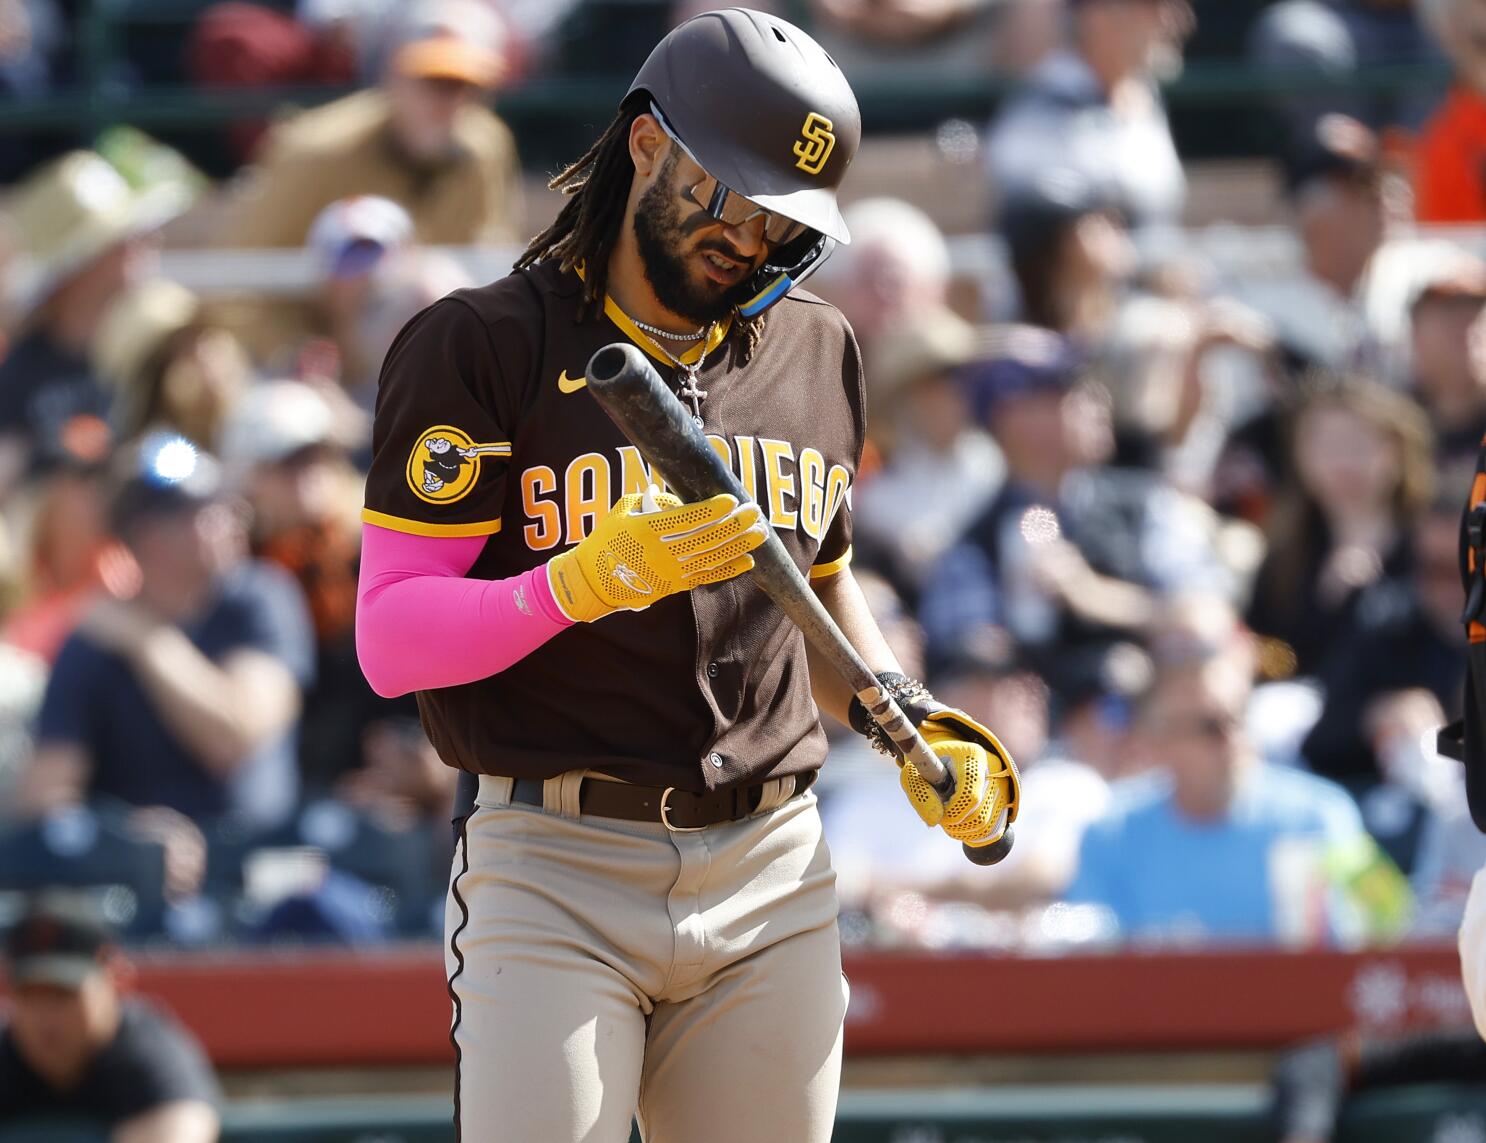 FriarNotes: Crismatt might be the “unsung hero” of the Padres